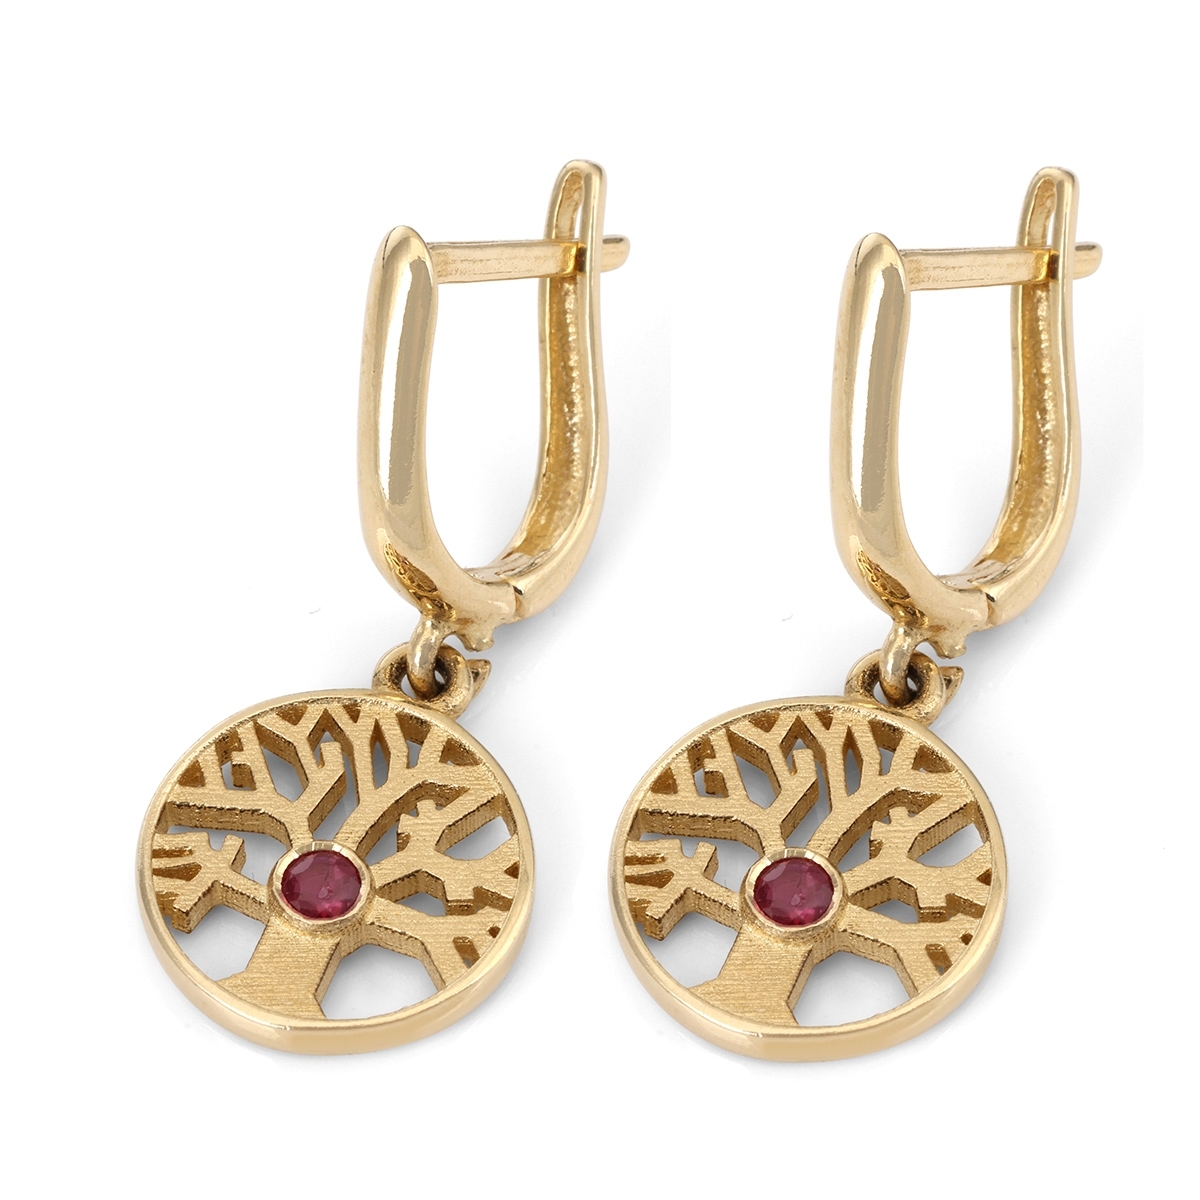 14K Gold Tree of Life Earrings with Rubies - 1